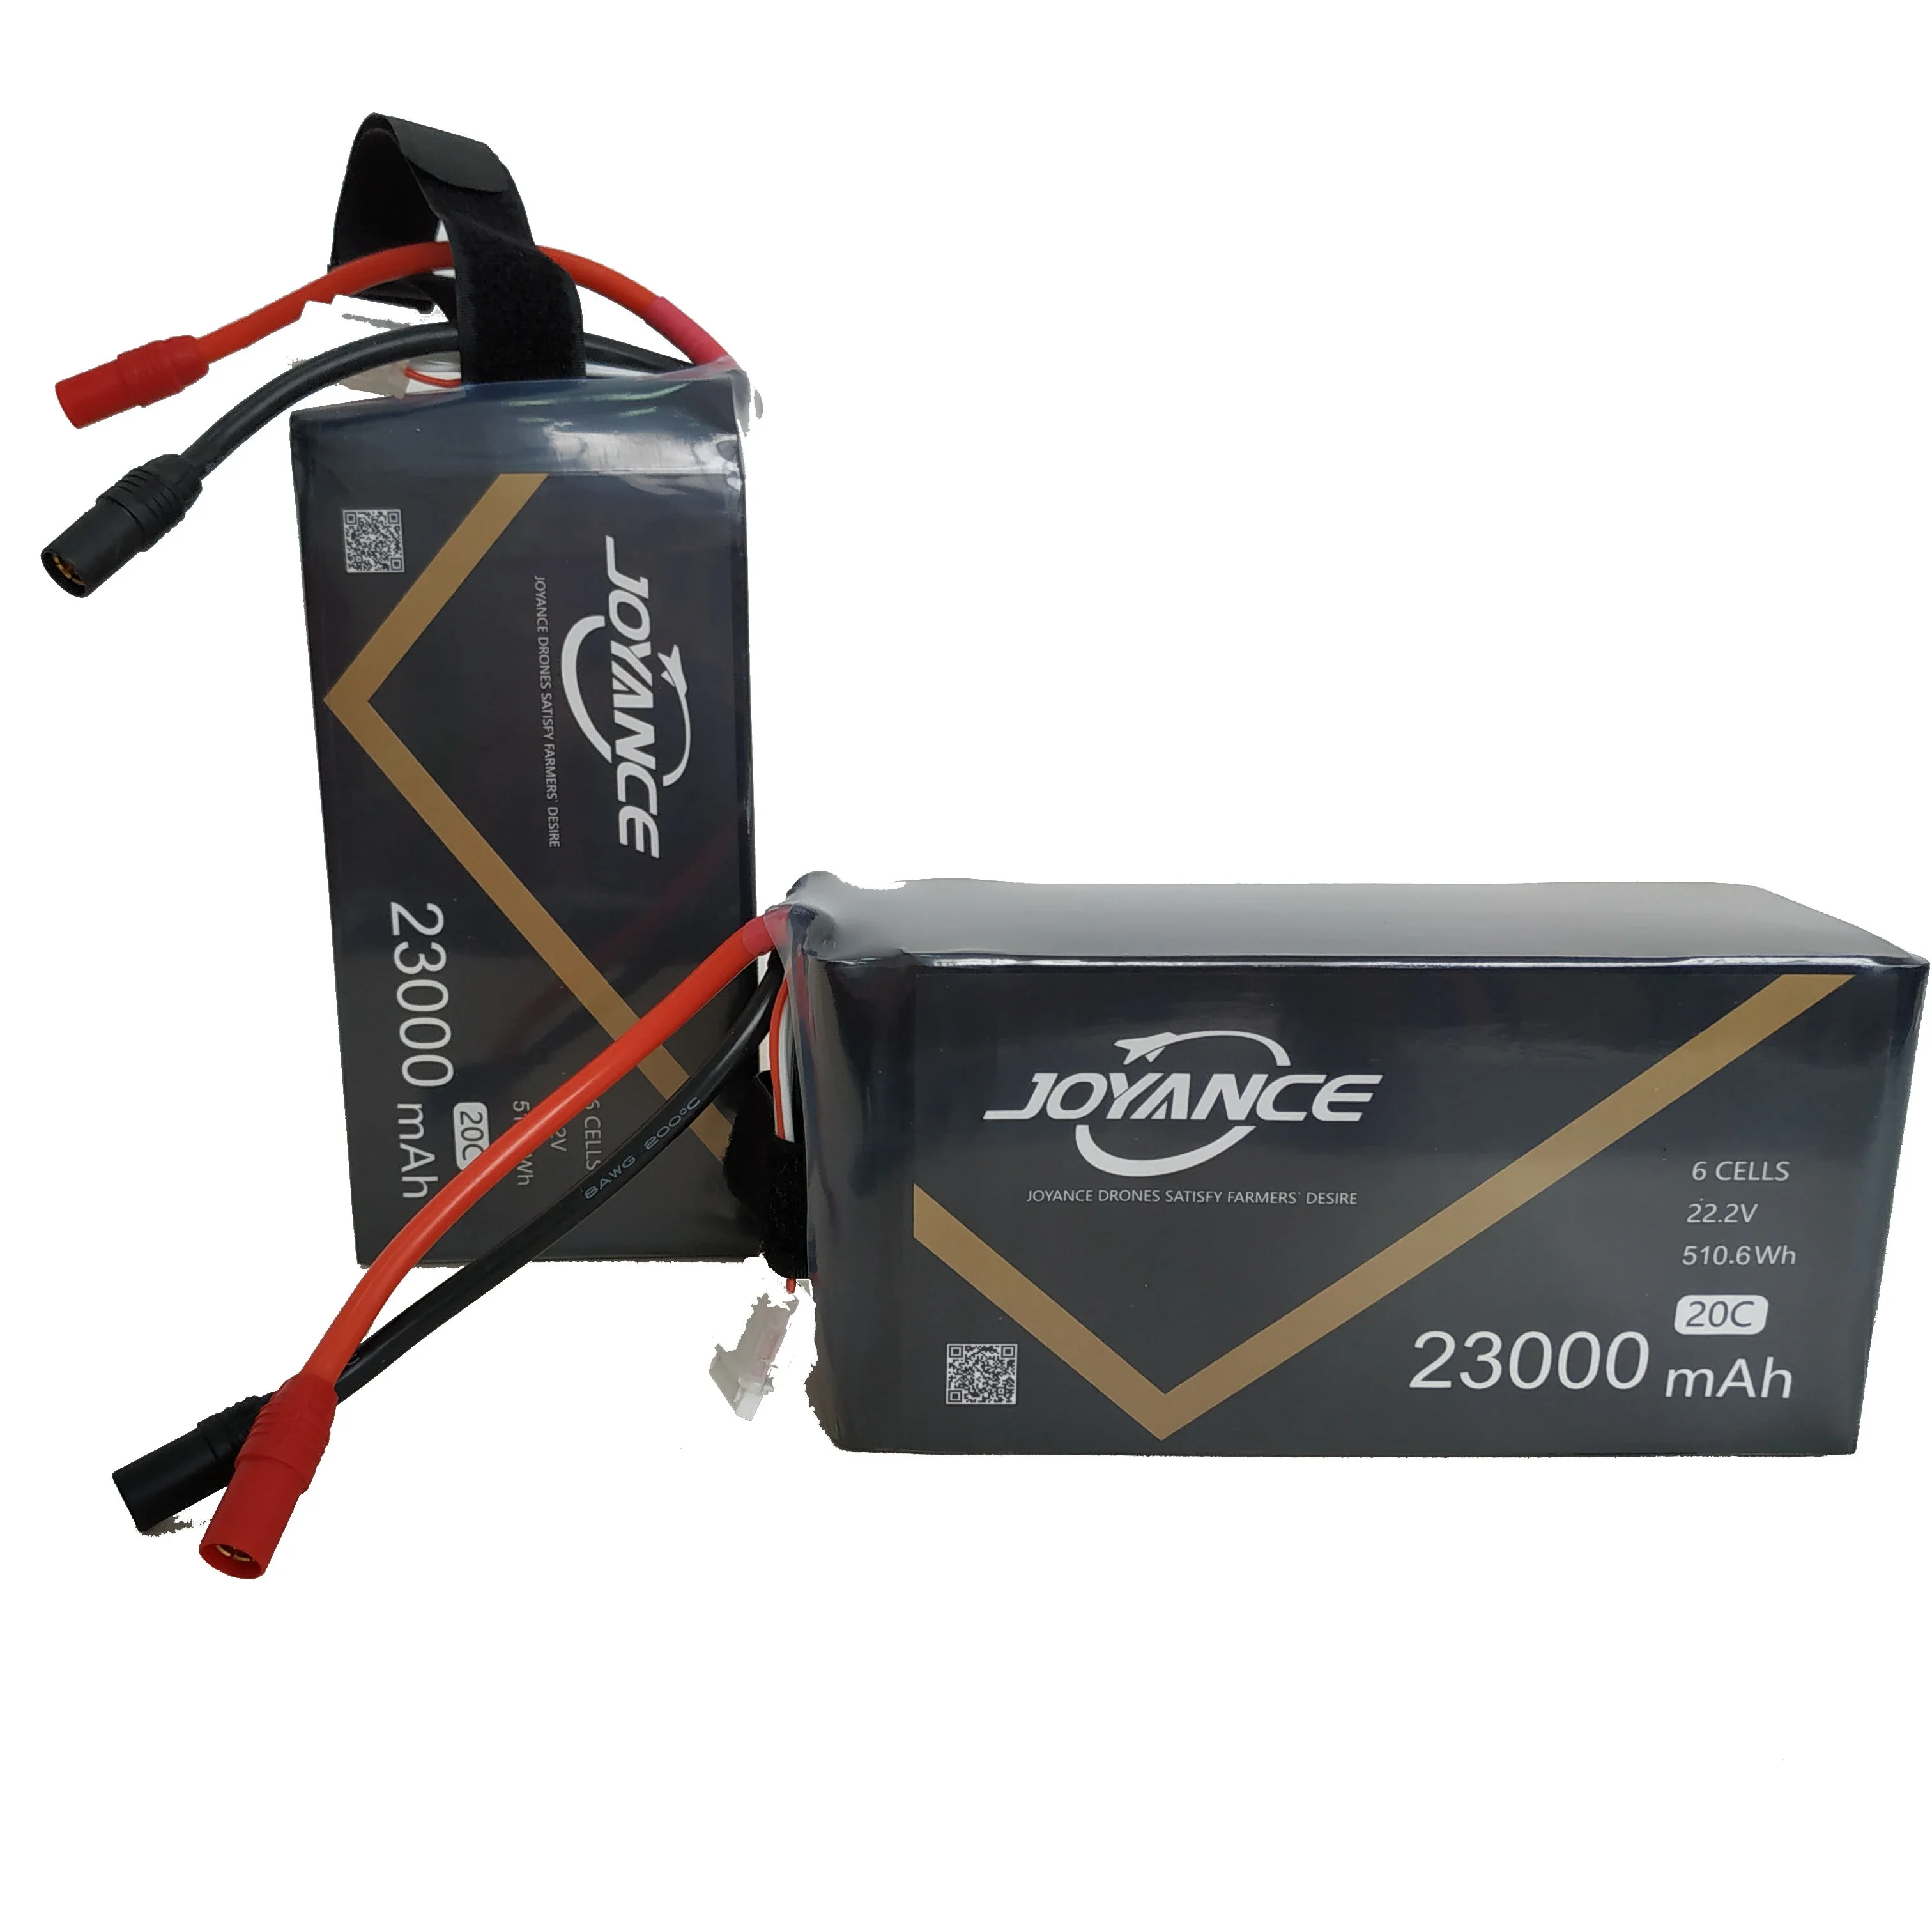 

Li-po 6S 23000 mAh battery for agriculture sprayer dr one Joyance brand / spare parts of agricultural dr one sprayer